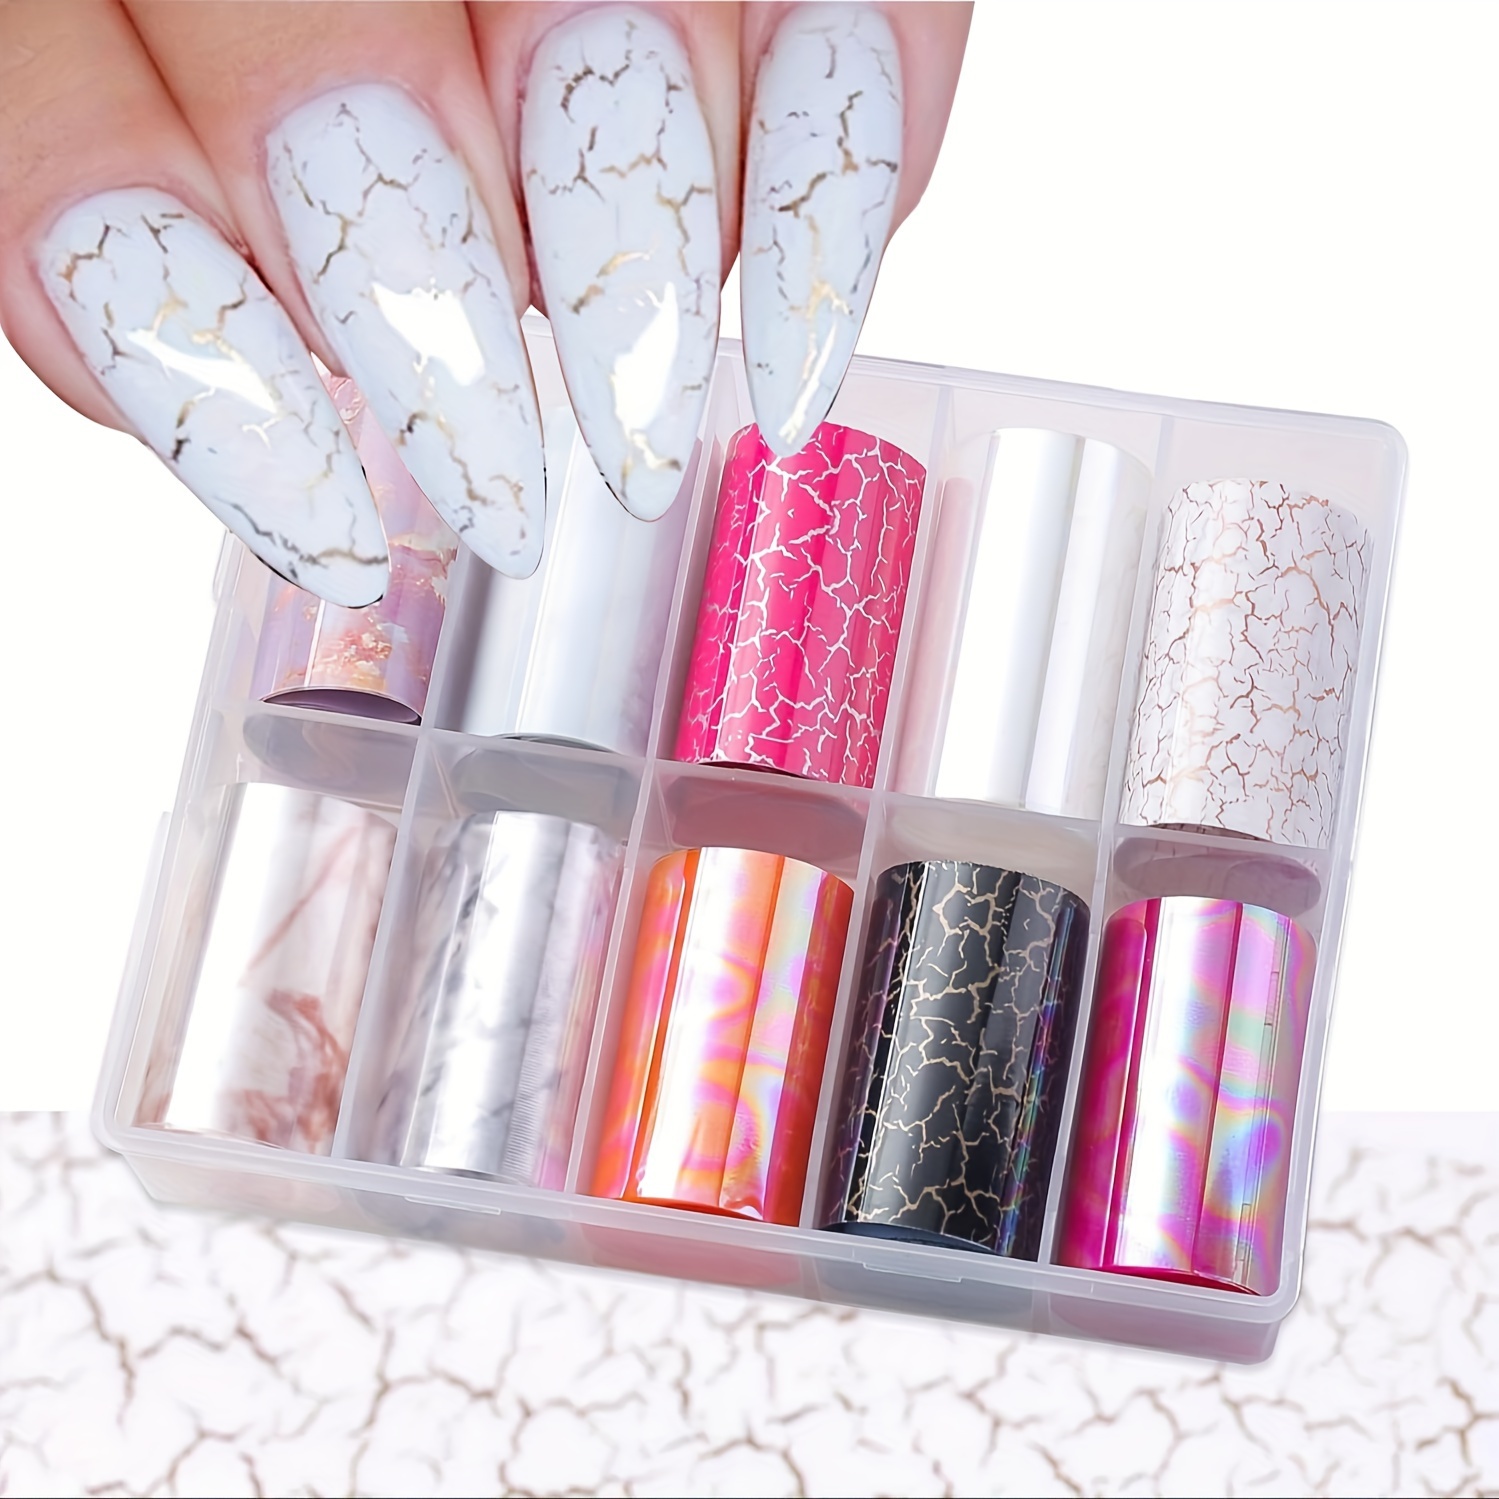 

Hypoallergenic Nail Art Transfer Stickers - 10 Rolls Of Iridescent Holographic Foil, Starry Sky & Marble Designs For Diy Manicure Decoration